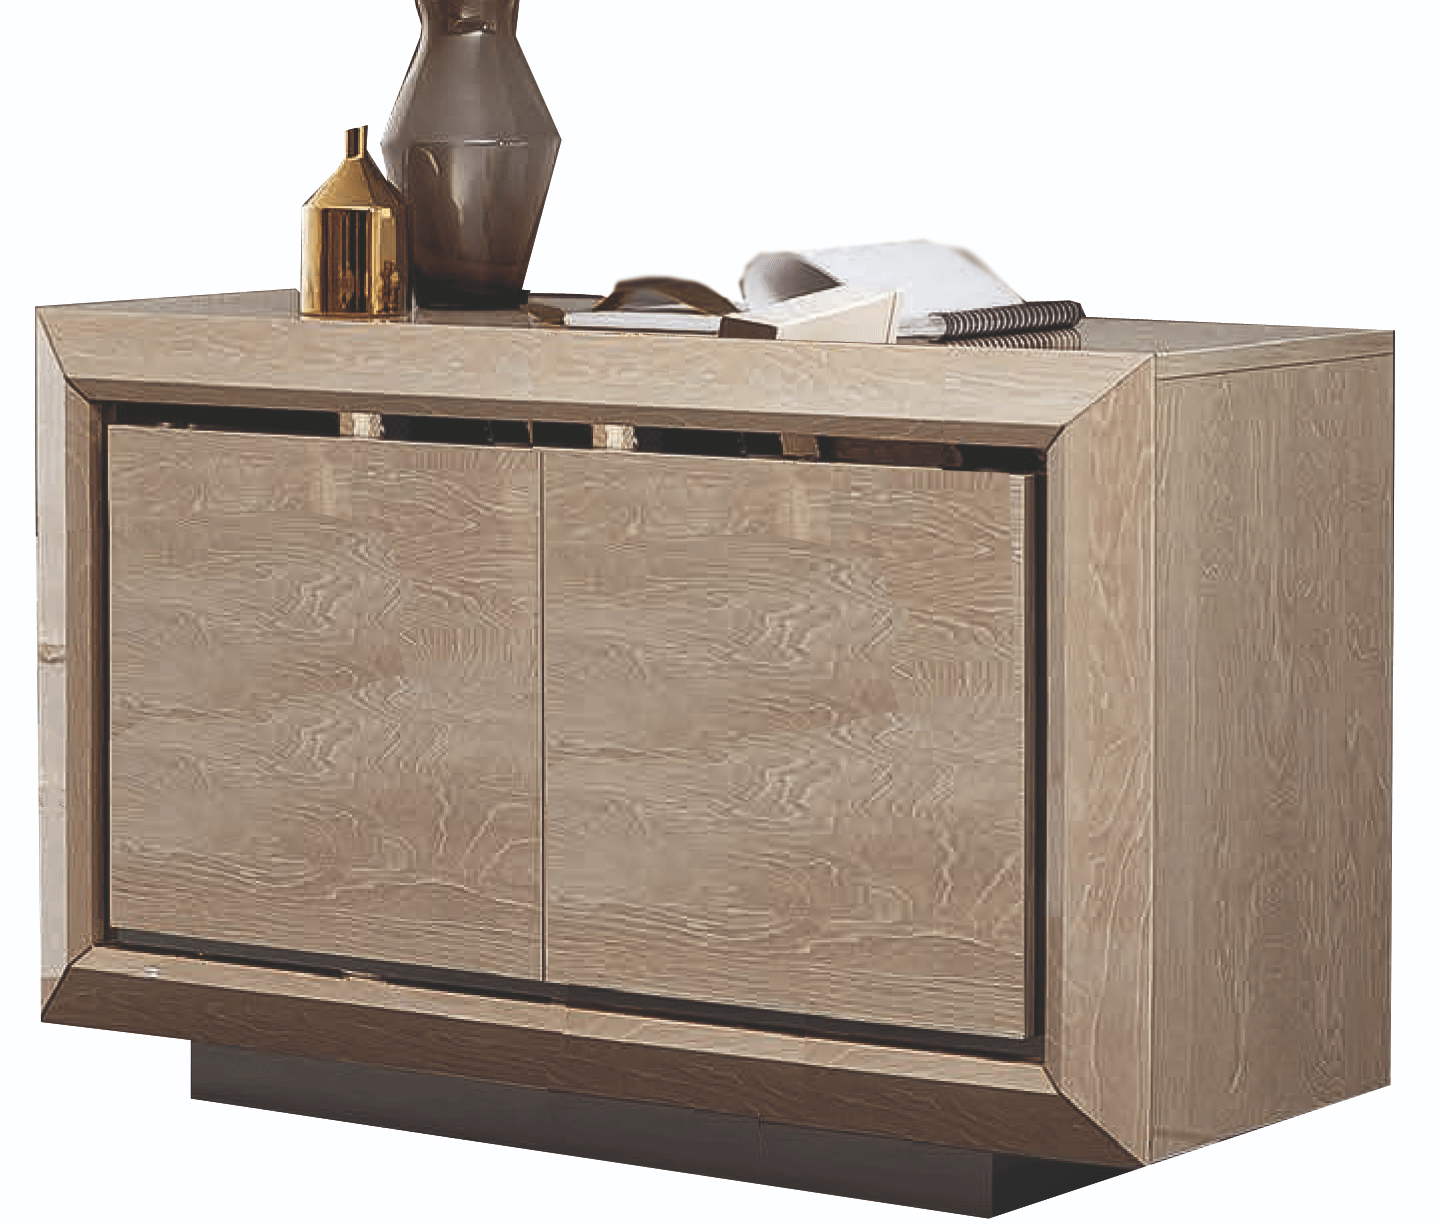 Brands Camel Gold Collection, Italy Elite 2 Door Buffet IVORY